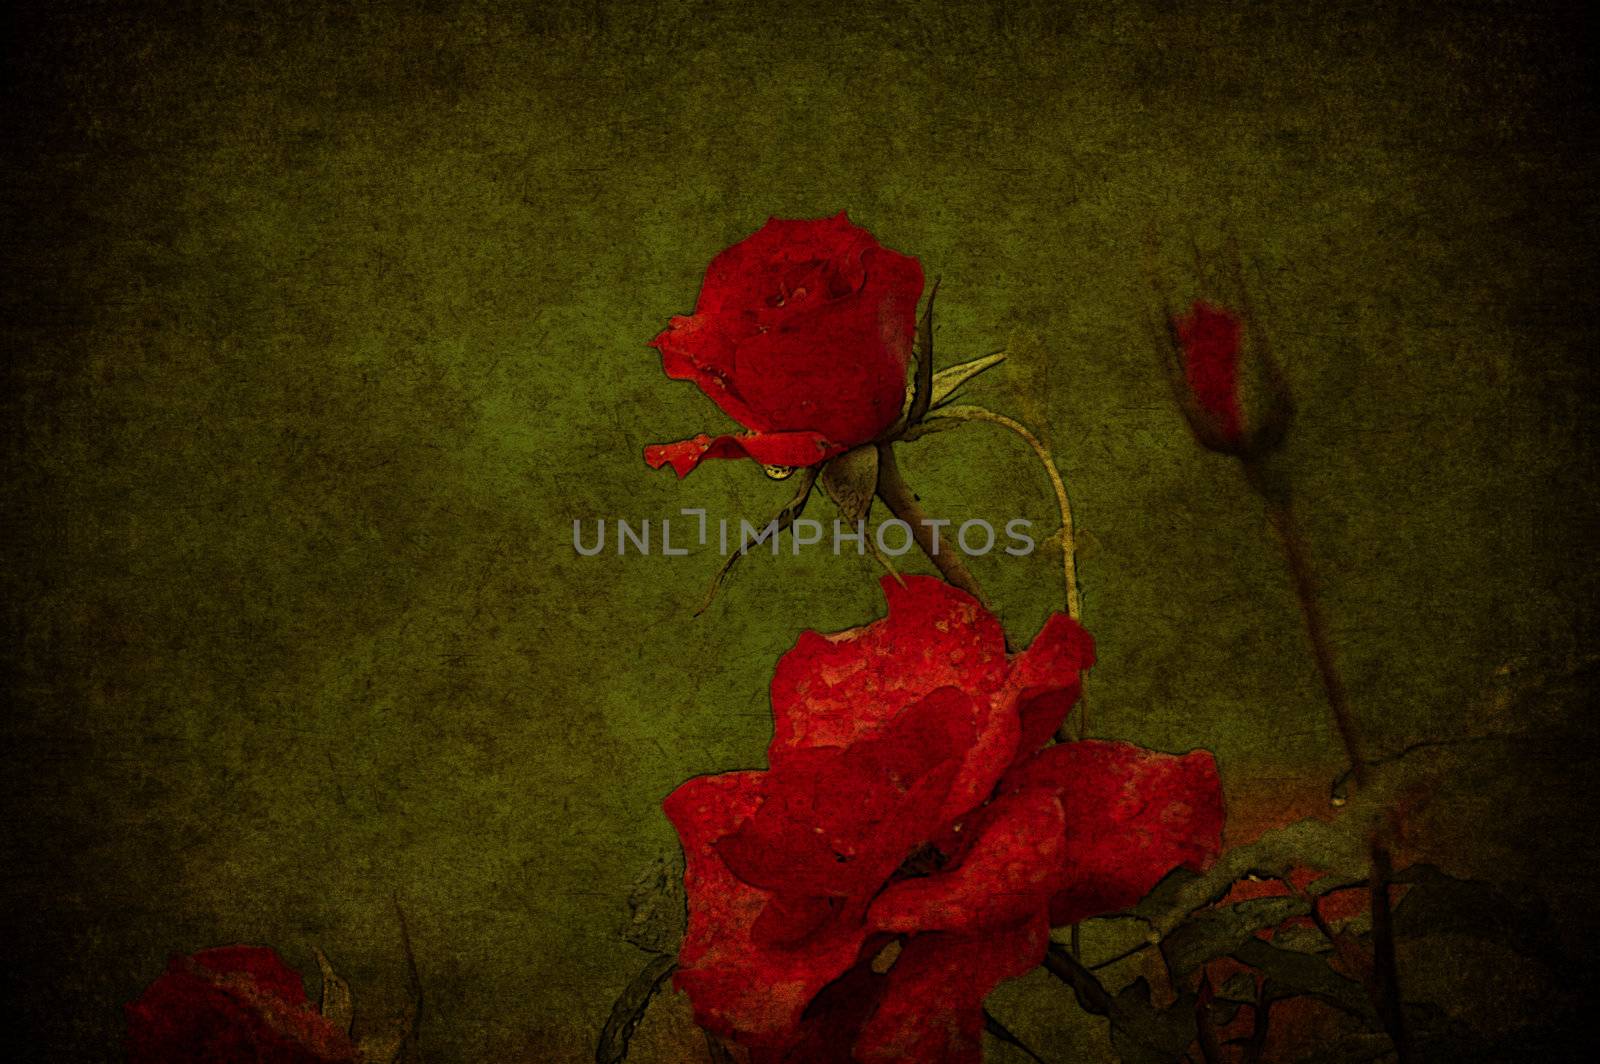 A red rose aged in a green grunge background